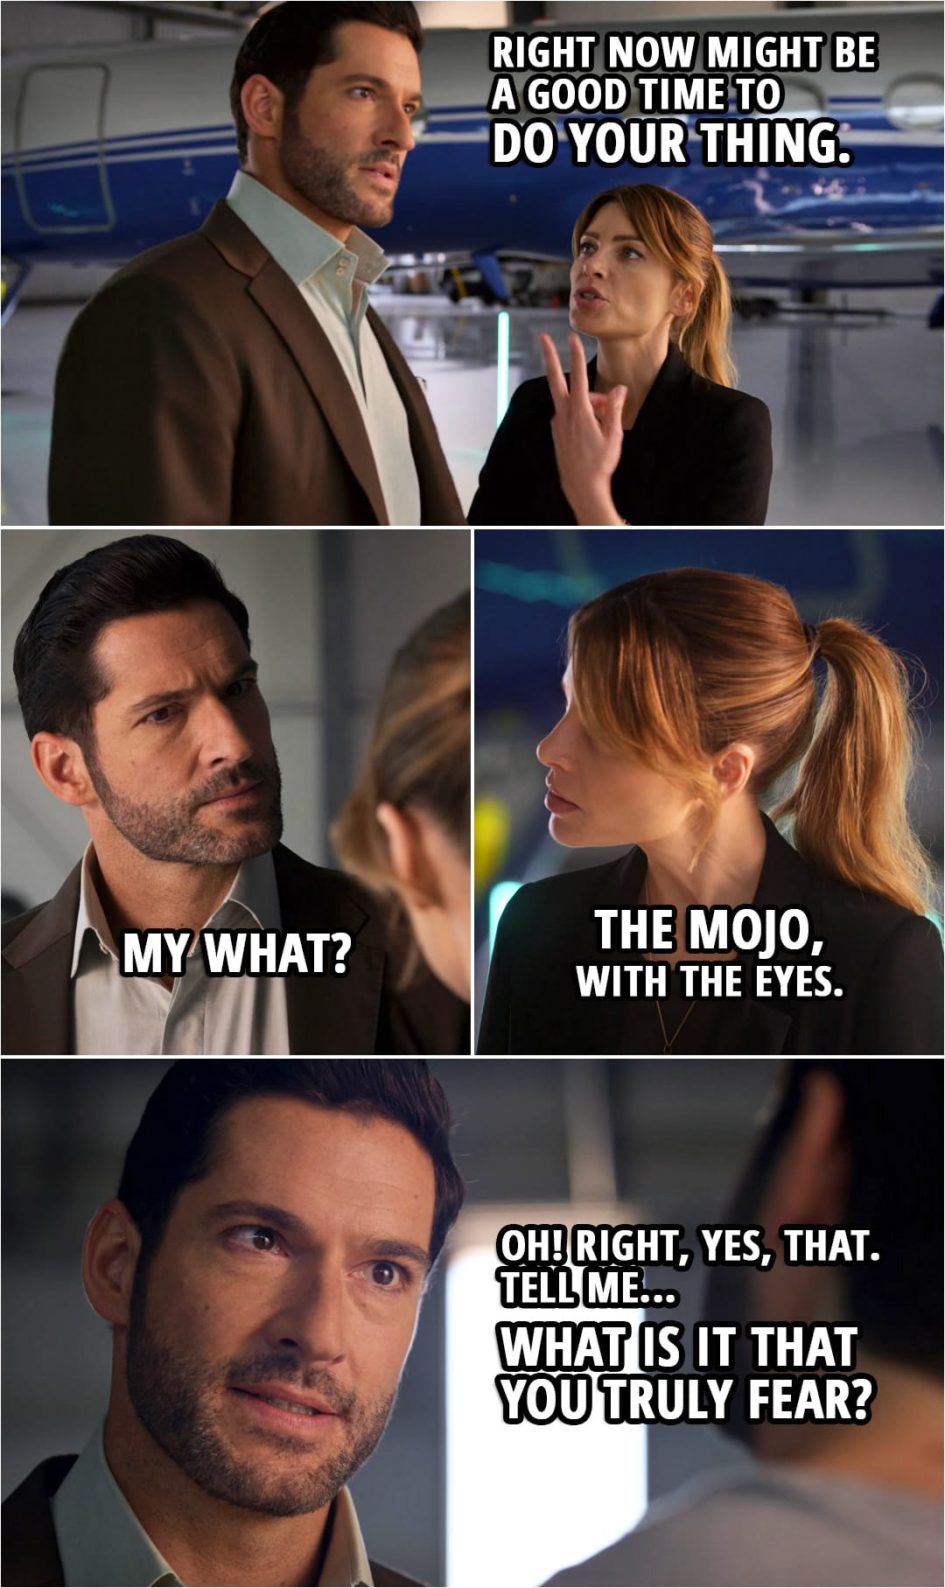 Quote from Lucifer 5x02 | (Michael is pretending to be Lucifer, solving crimes and stuff...) Chloe Decker: So right now might be a good time to do your thing. Michael: My what? Chloe Decker: The mojo, with the eyes. Michael: Oh! Right, yes, that. Mr. Brody. Sorry, one last question. Tell me... What is it that you truly fear?